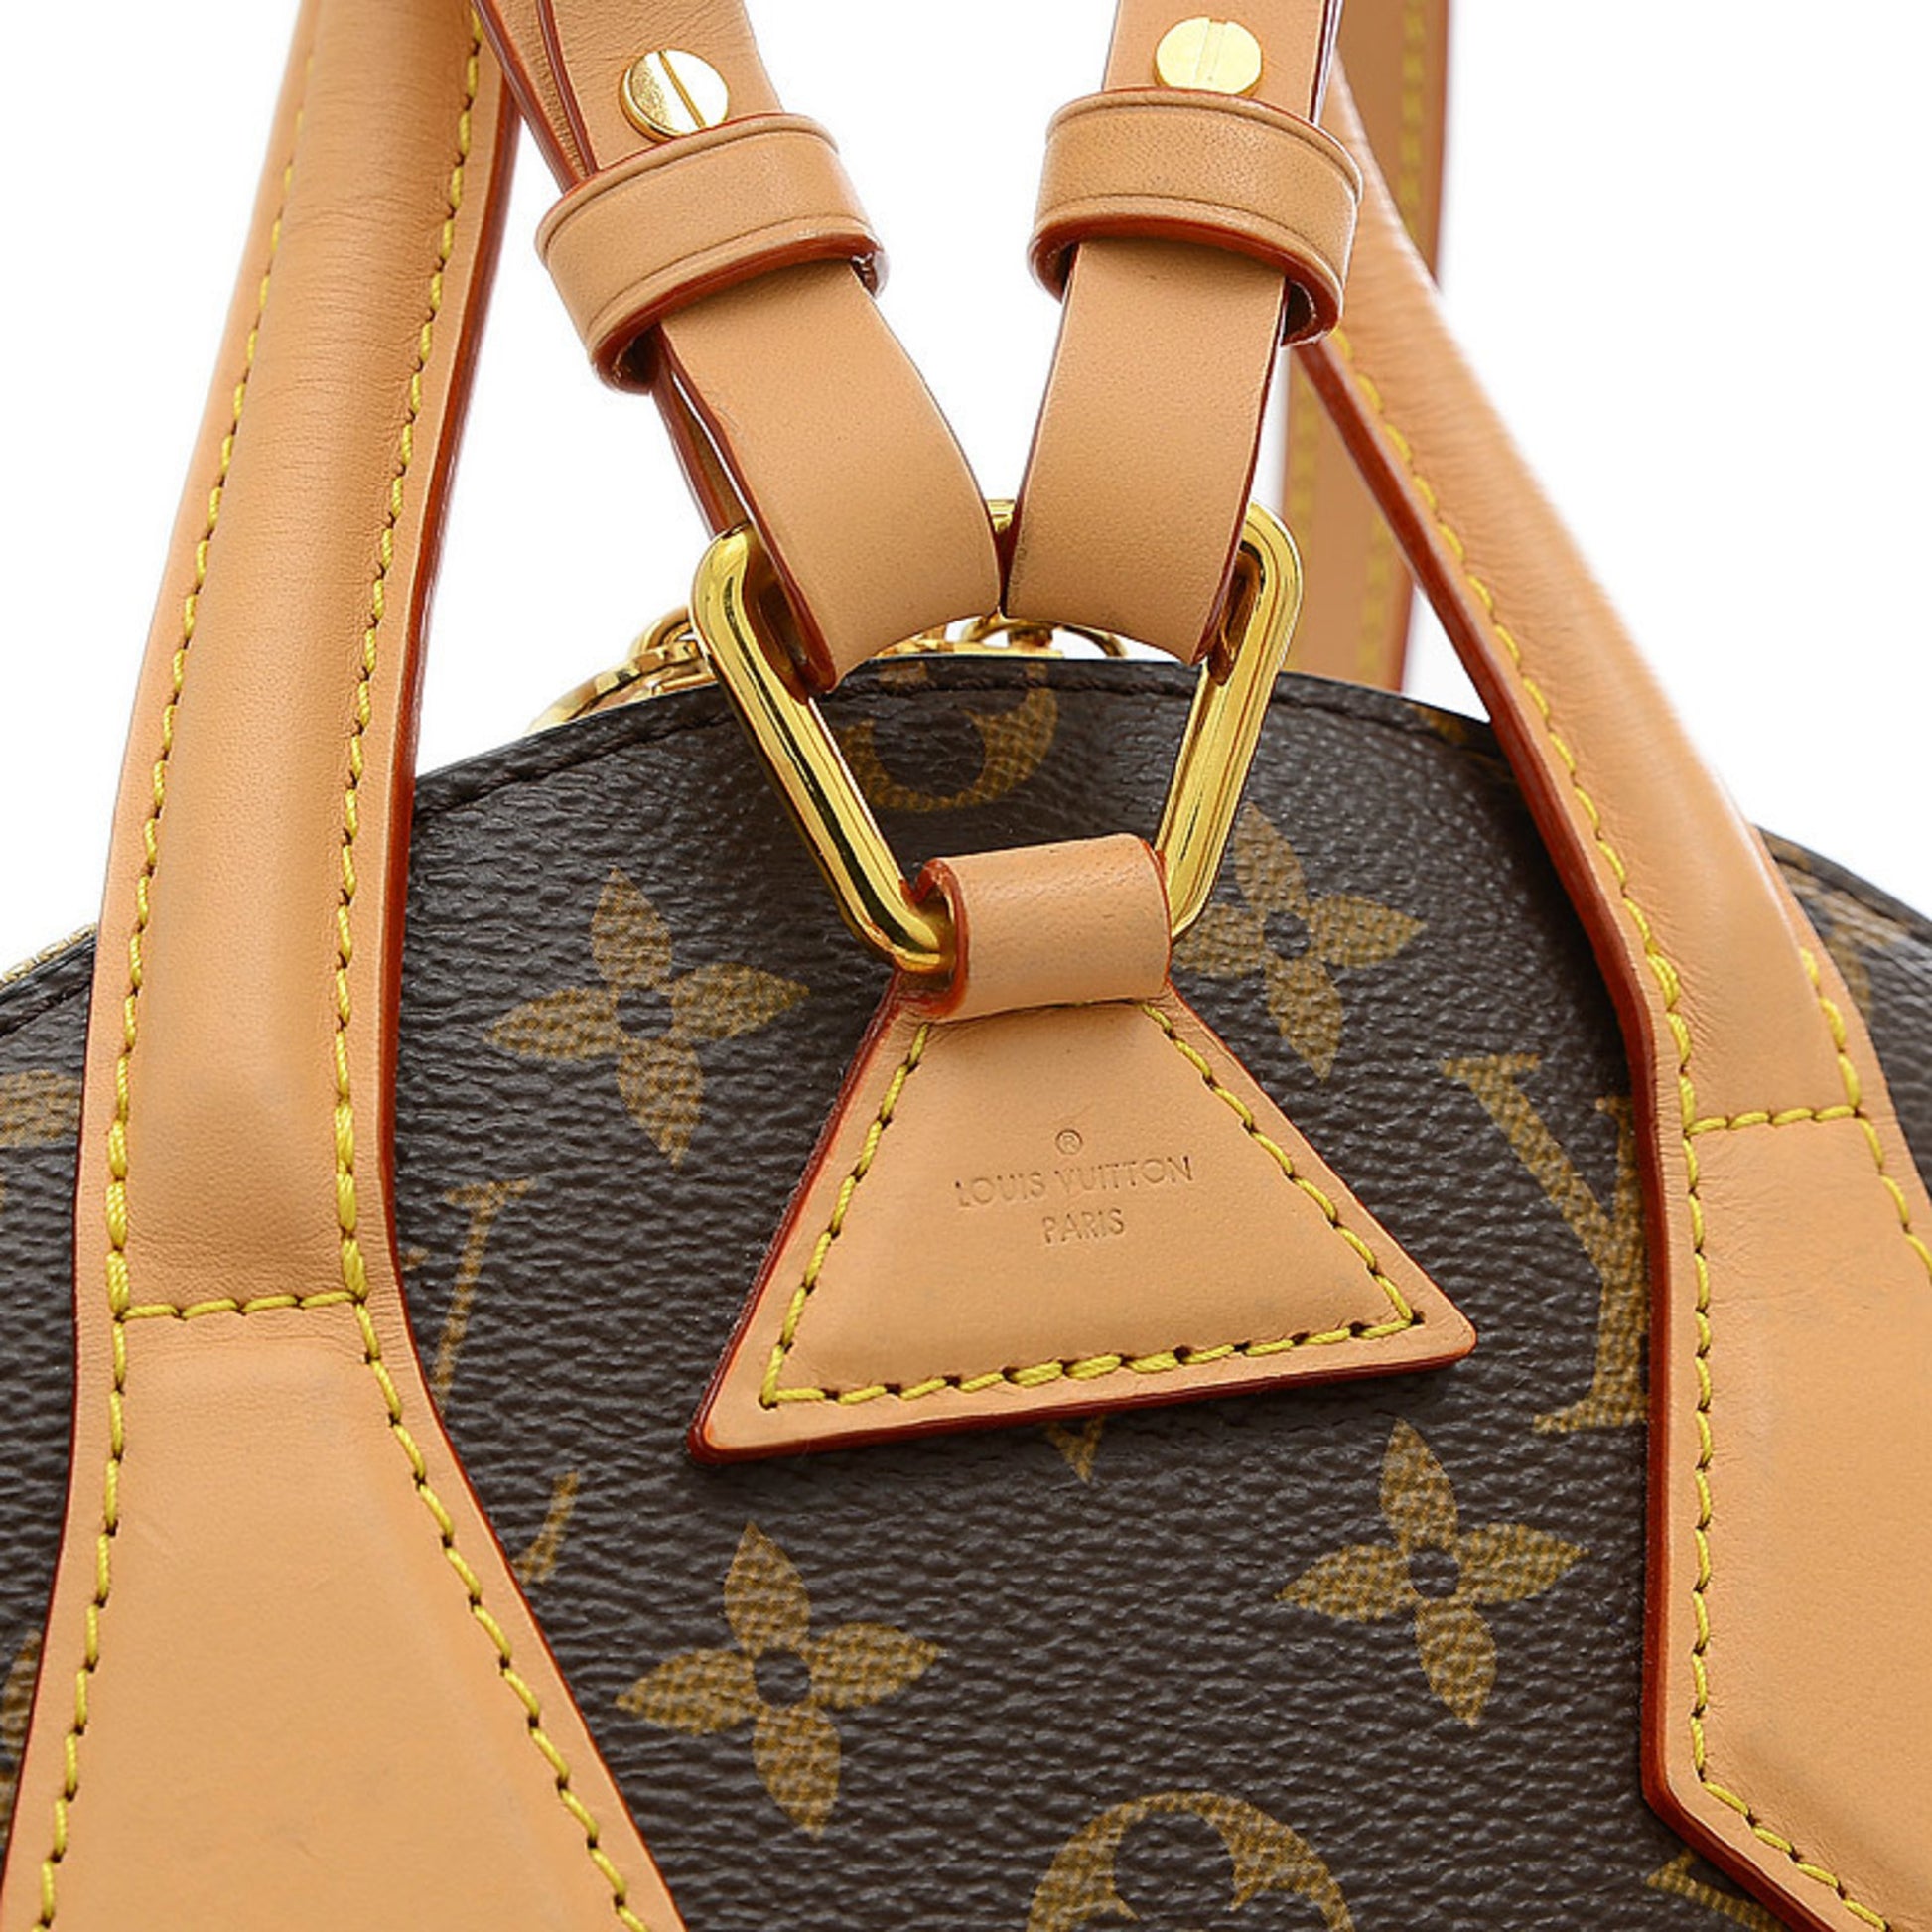 NEW LOUIS VUITTON BAGS MOON M44944 BACKPACK - Celebrity standing